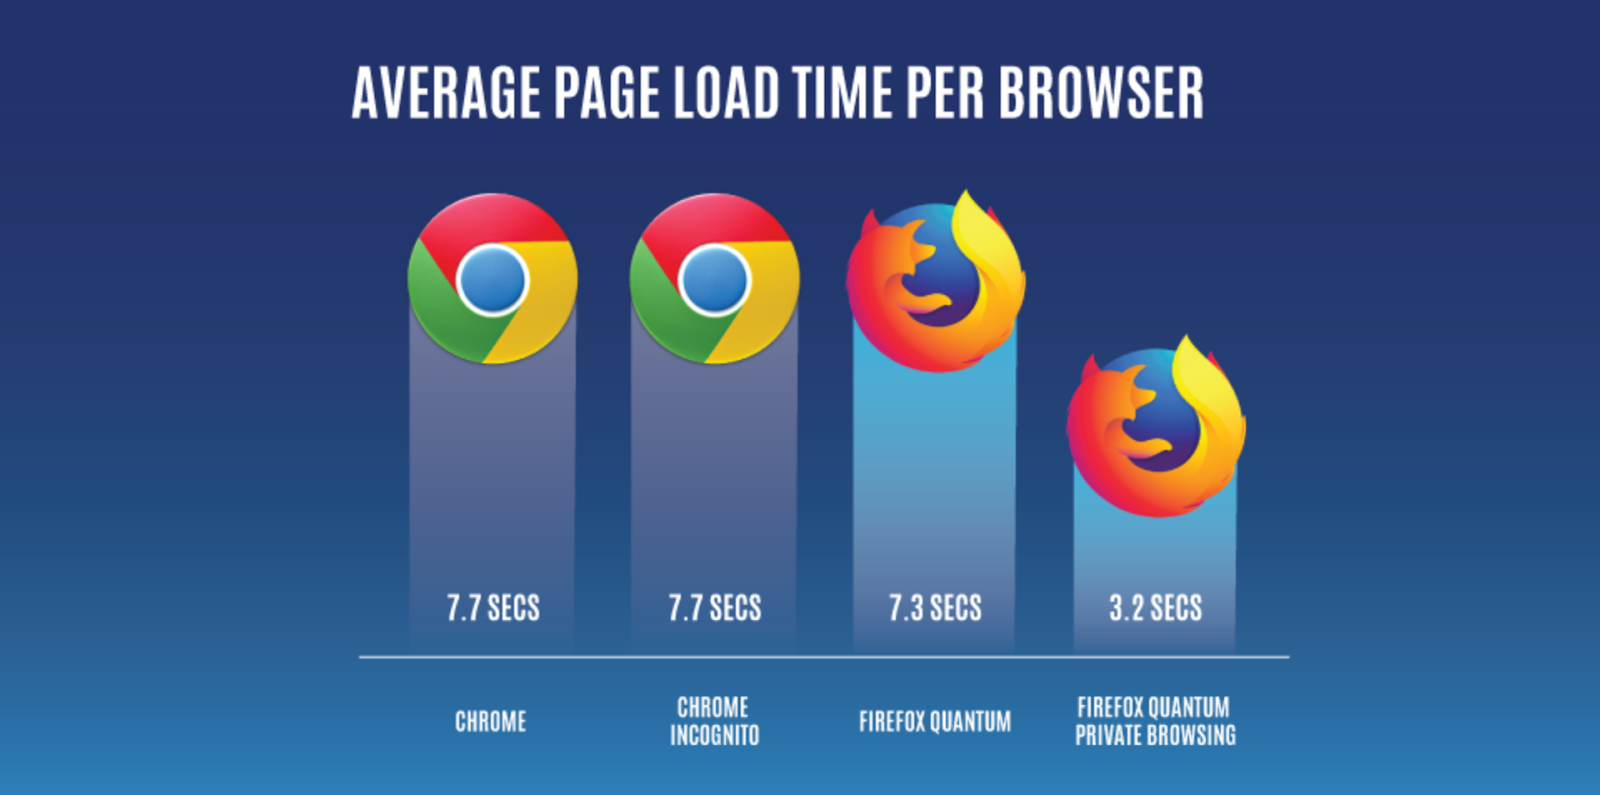 What browser is faster than Firefox?